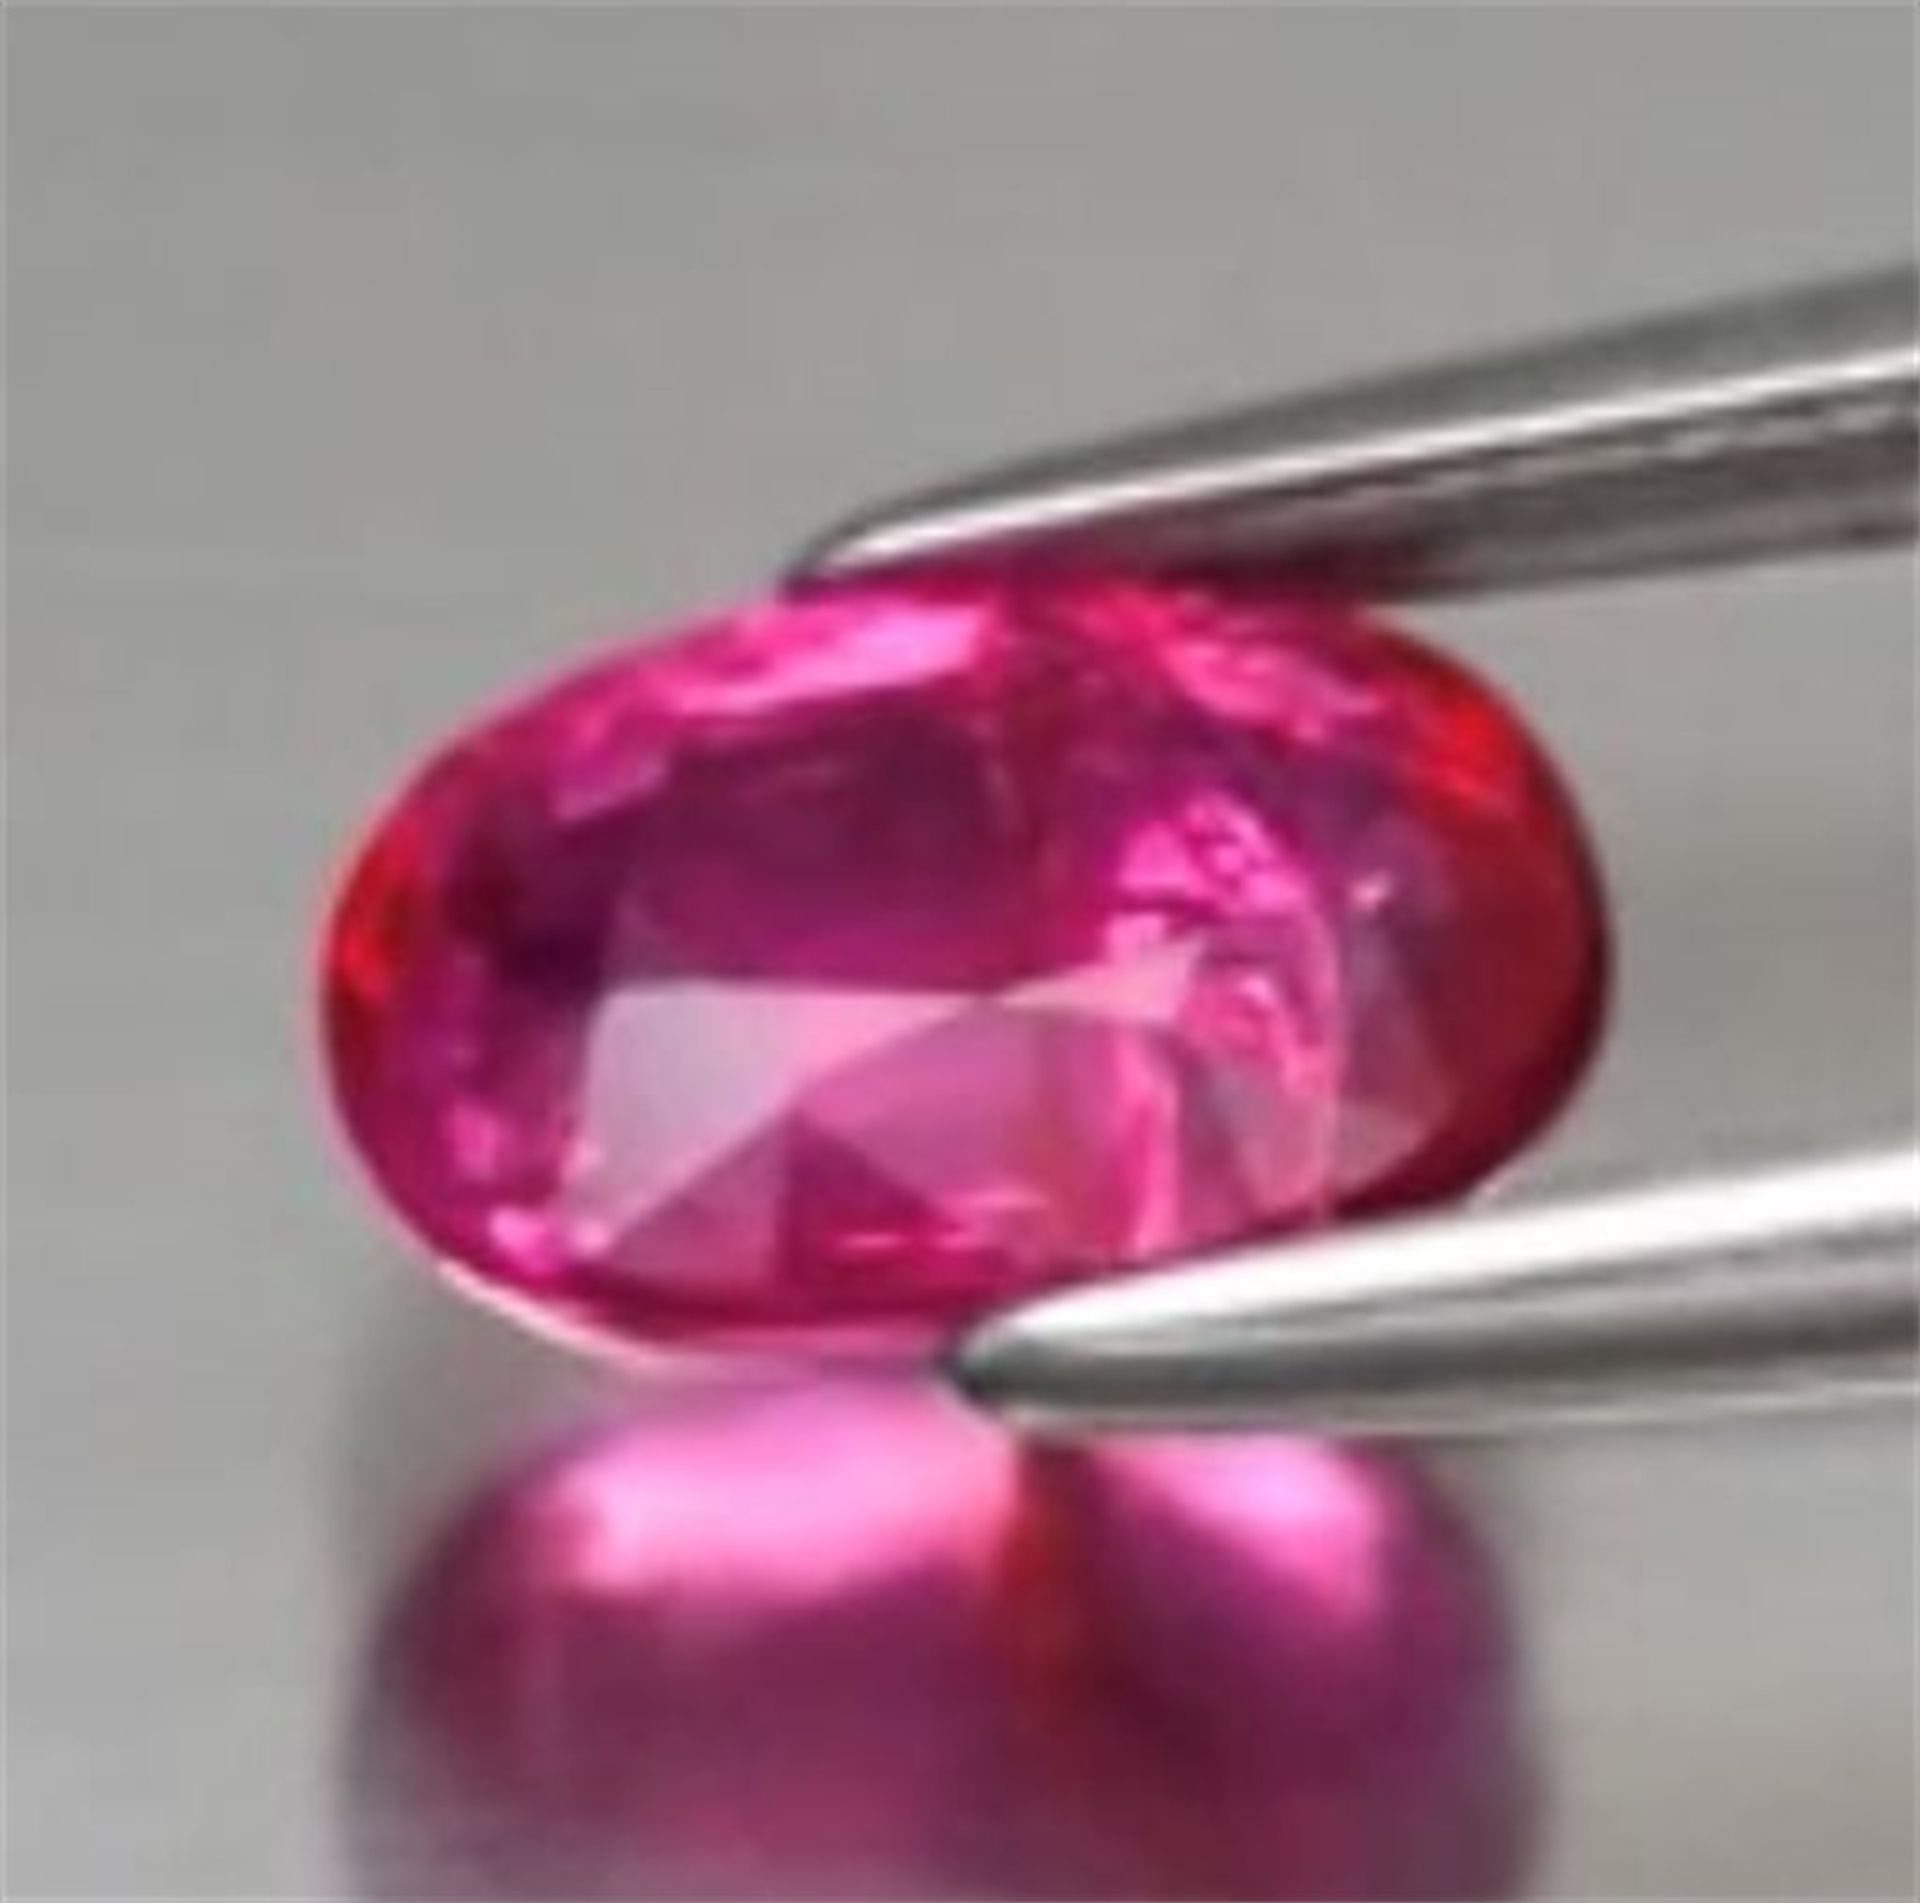 LOTUS Certified 0.99 ct. Hot Pink Sapphire MOZAMBIQUE - Image 7 of 10